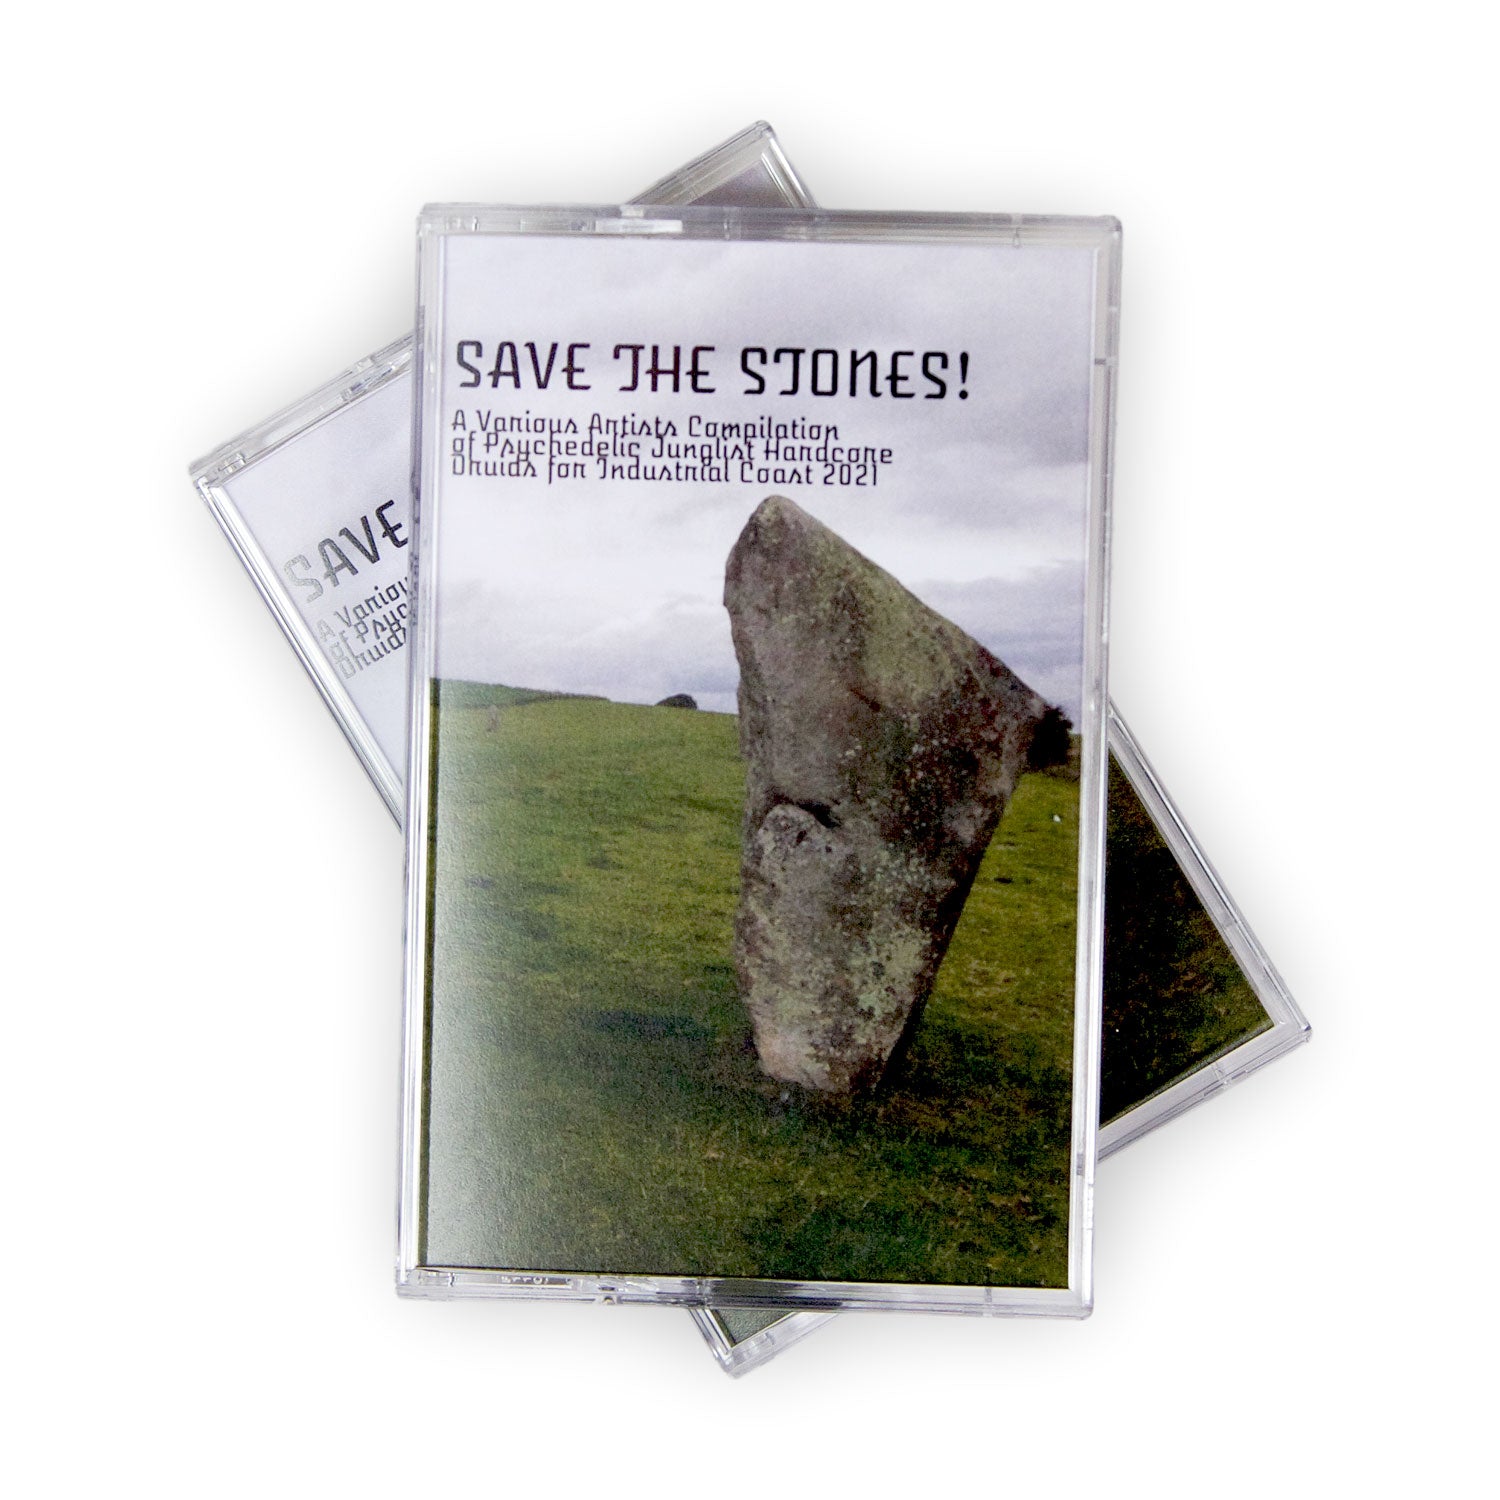 Save-the-stones